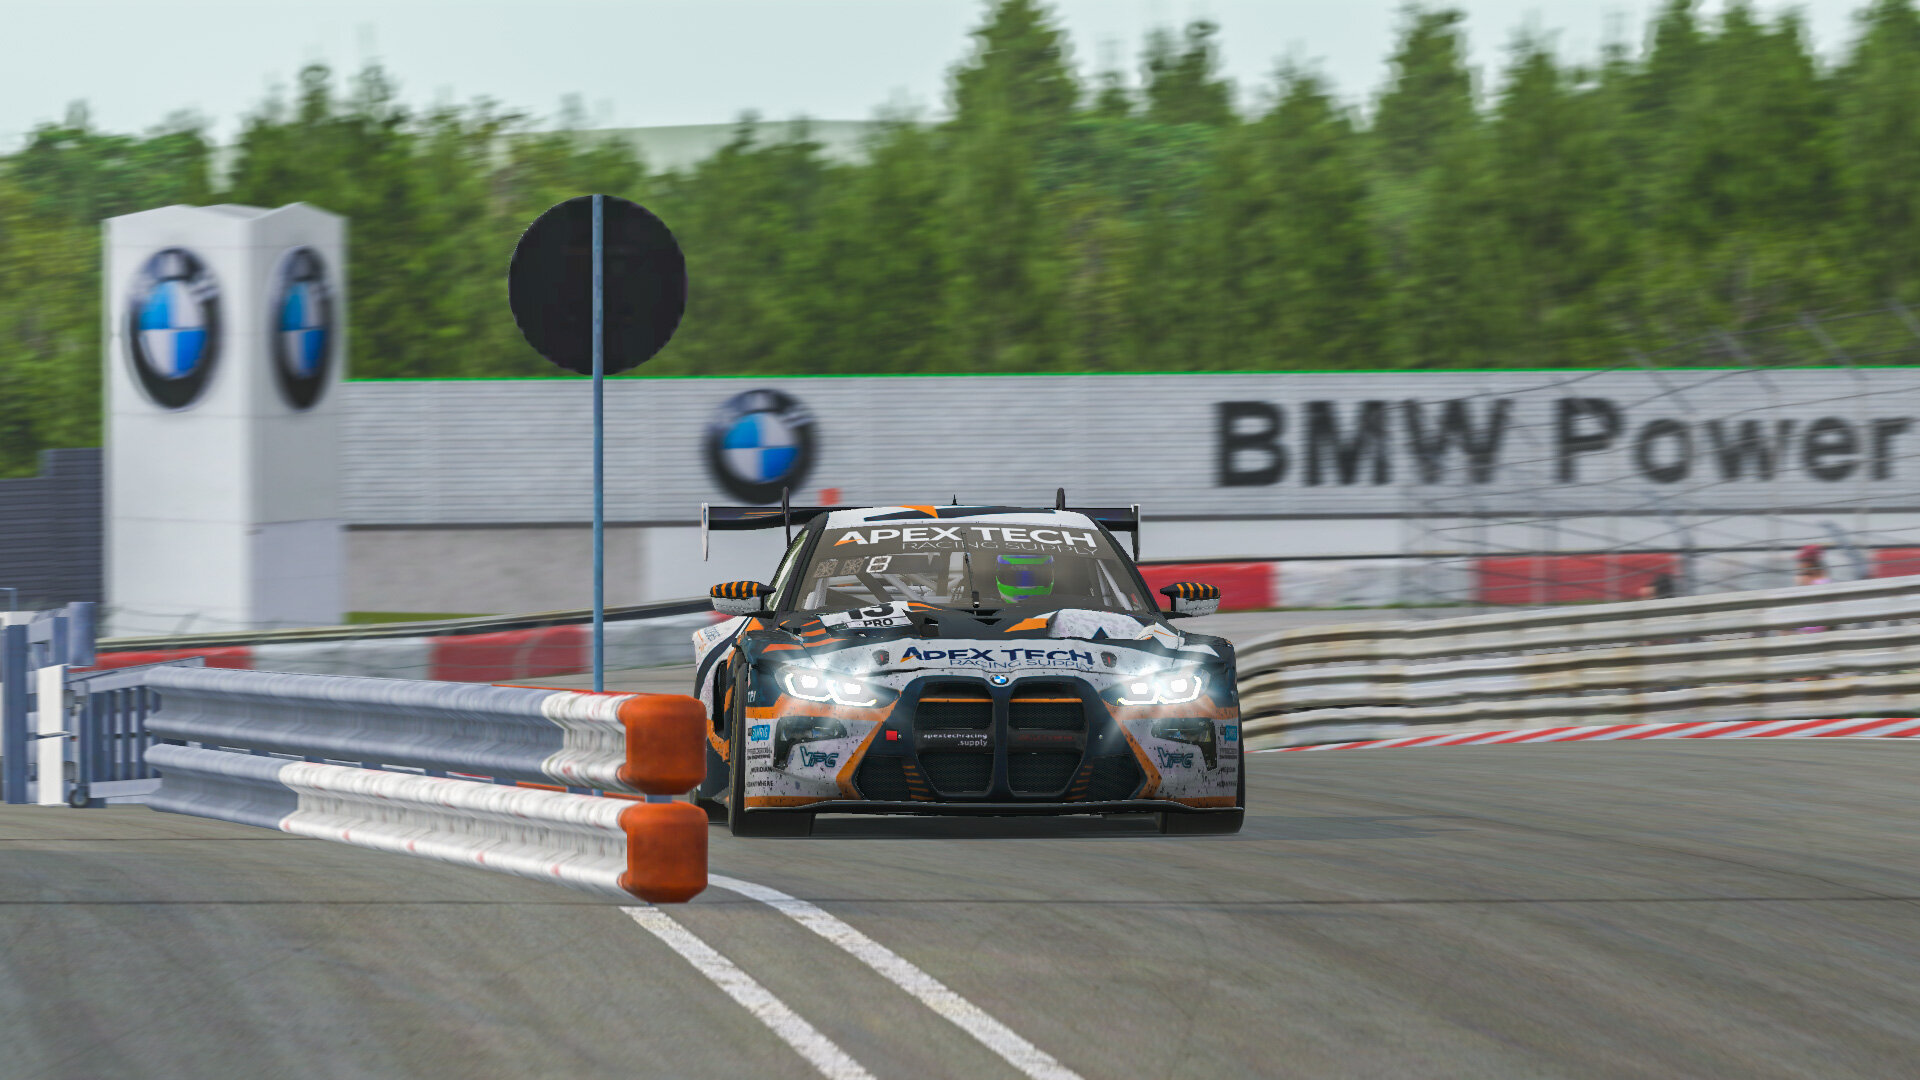 🏁🇩🇪 P7 at the Ring 🇩🇪🏁

Last weekend saw the race of races.  The 24 hours of N&uuml;rburgring hosted by iRacing !

With any of these big events, you need to have some luck and unfortunately, lady luck was not looking down upon us fondly.

After